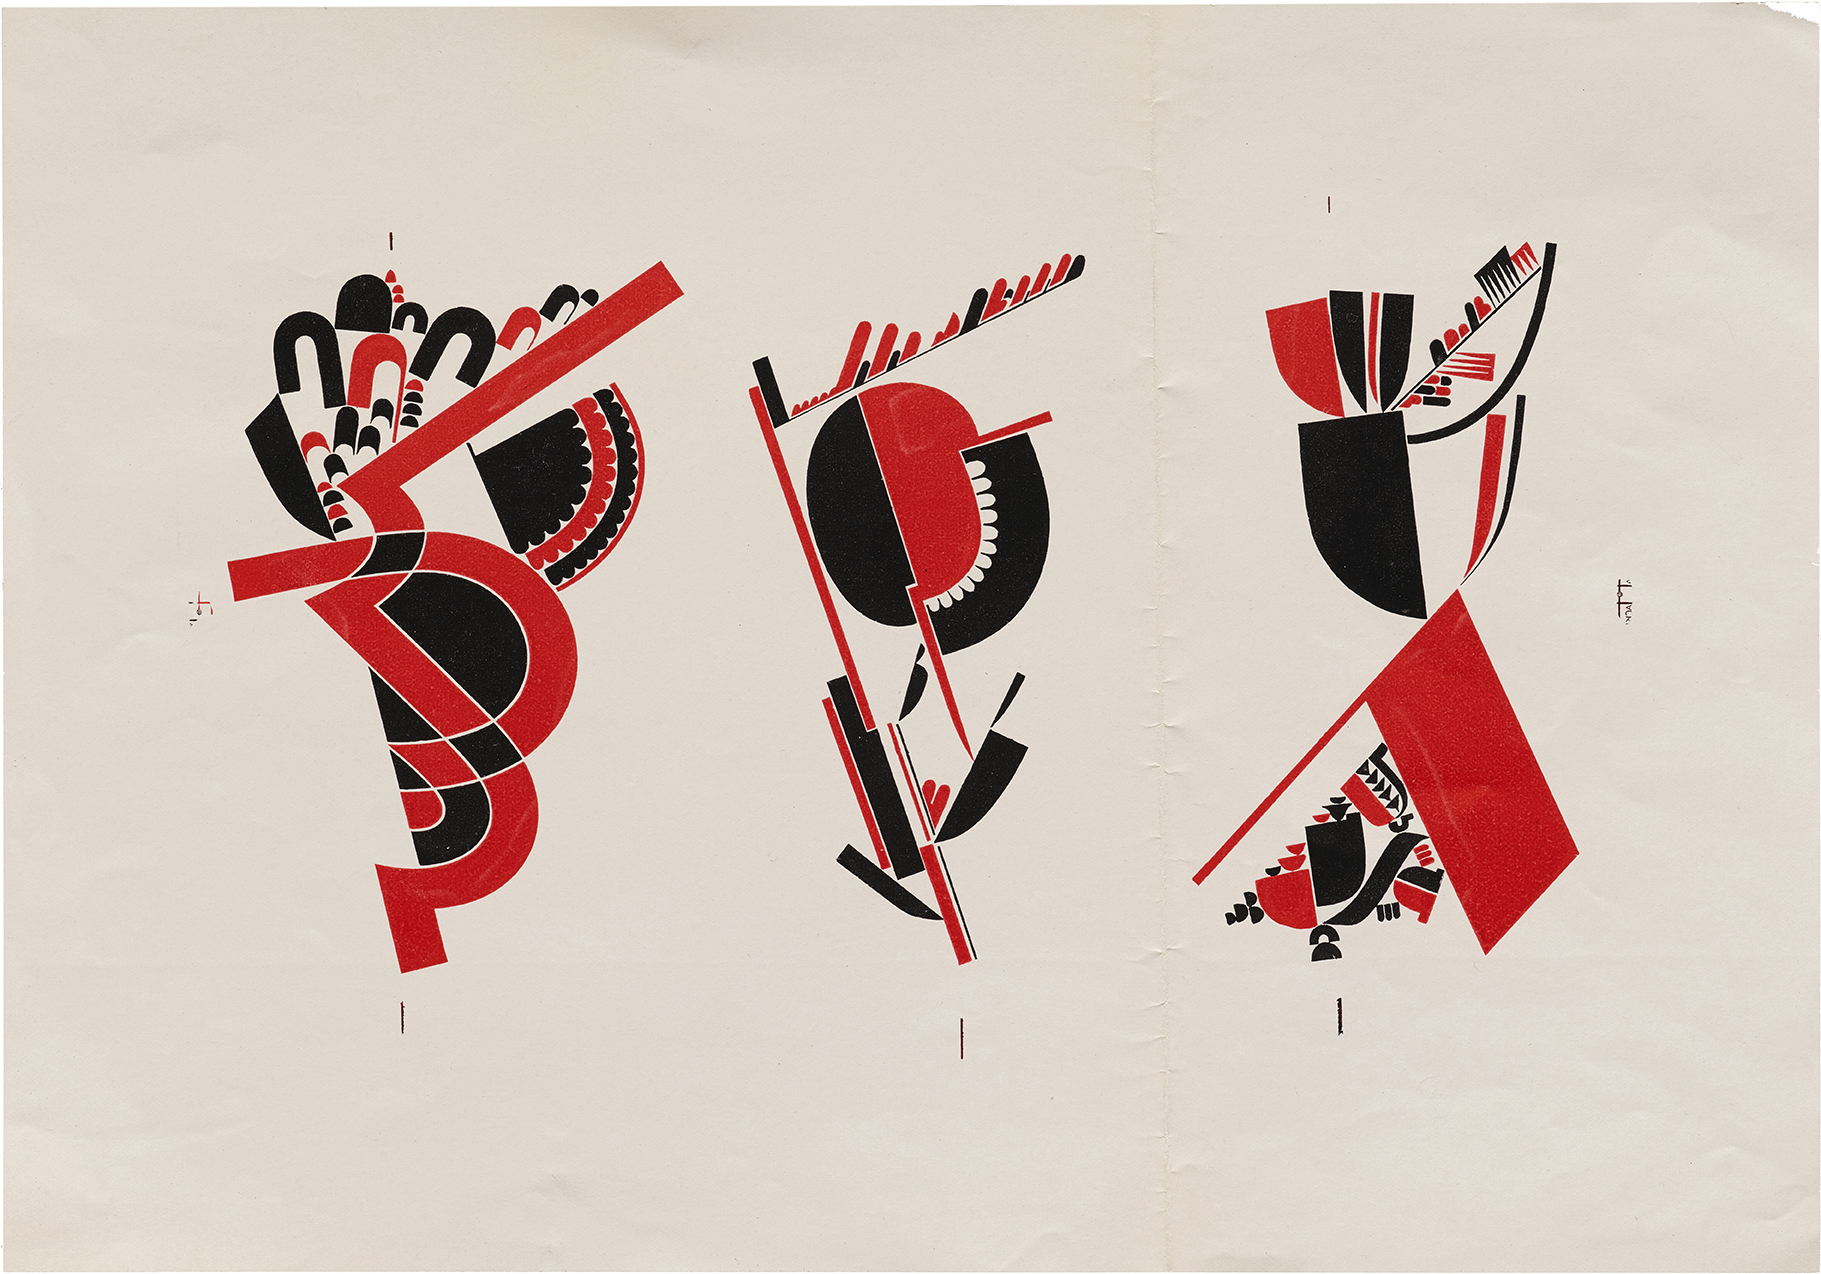  Stencil studies for Thomas Dreier, The Power of Print—and Men (Brooklyn: Mergenthaler Linotype Co., 1936). Collection of Letterform Archive. 